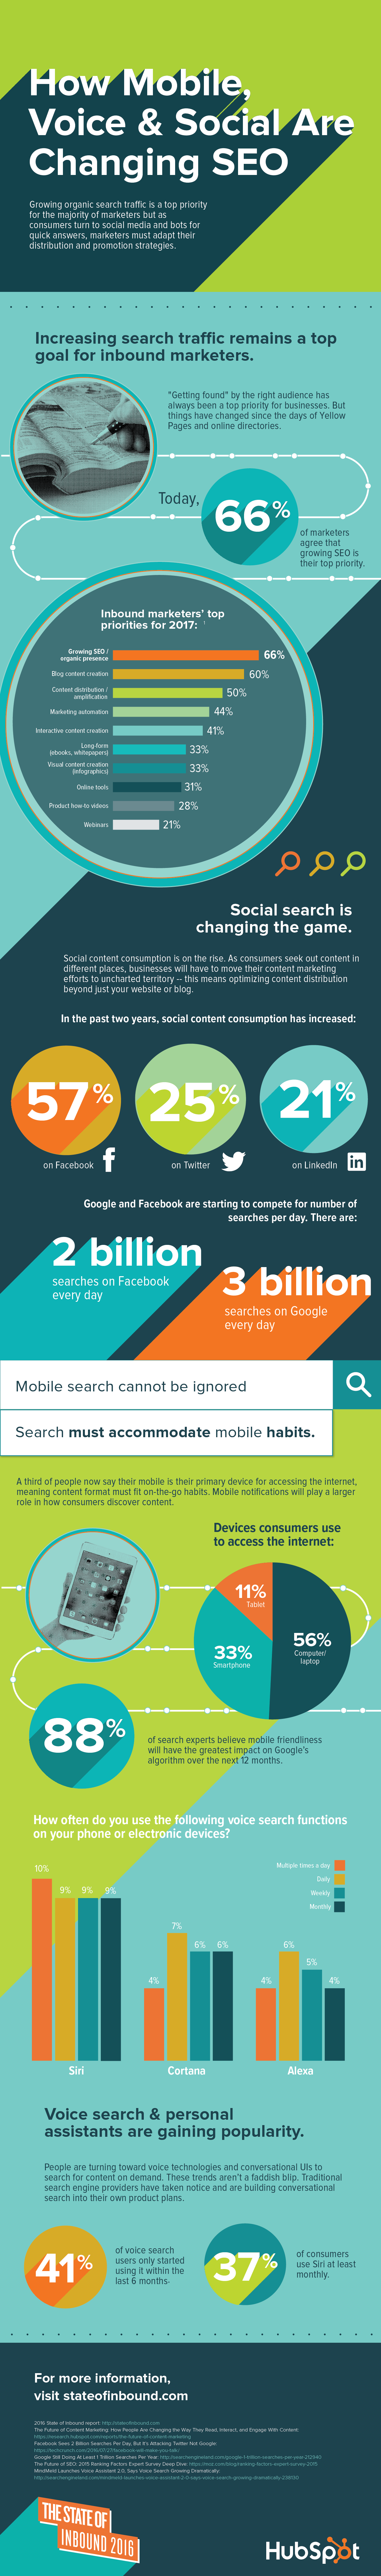 infographic on mobile, voice and social seo